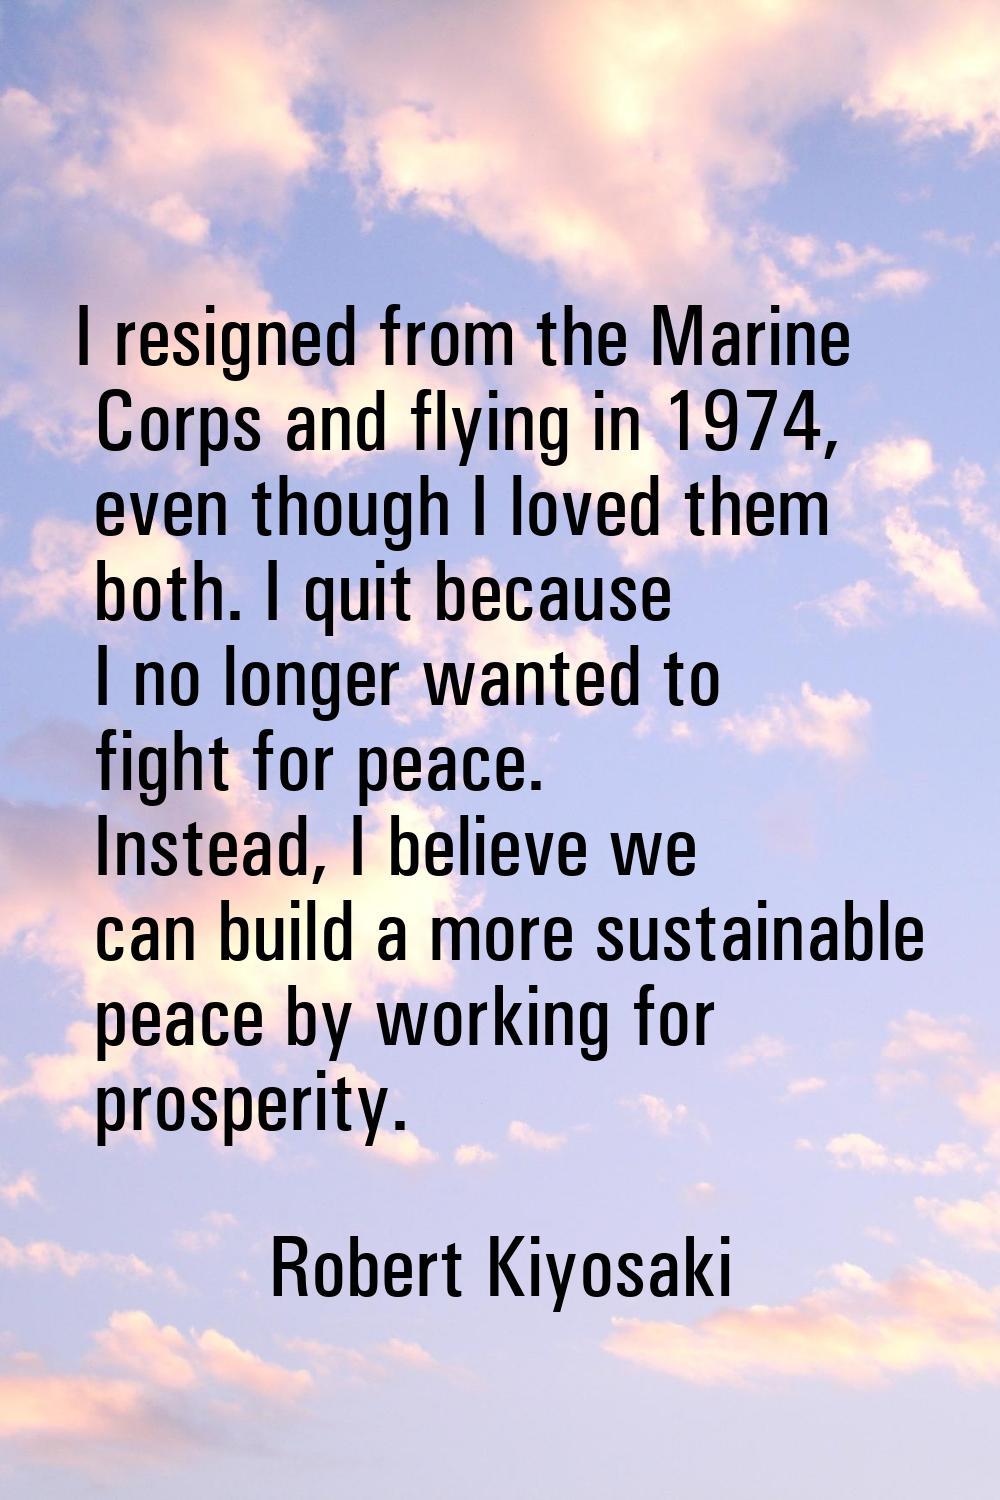 I resigned from the Marine Corps and flying in 1974, even though I loved them both. I quit because 